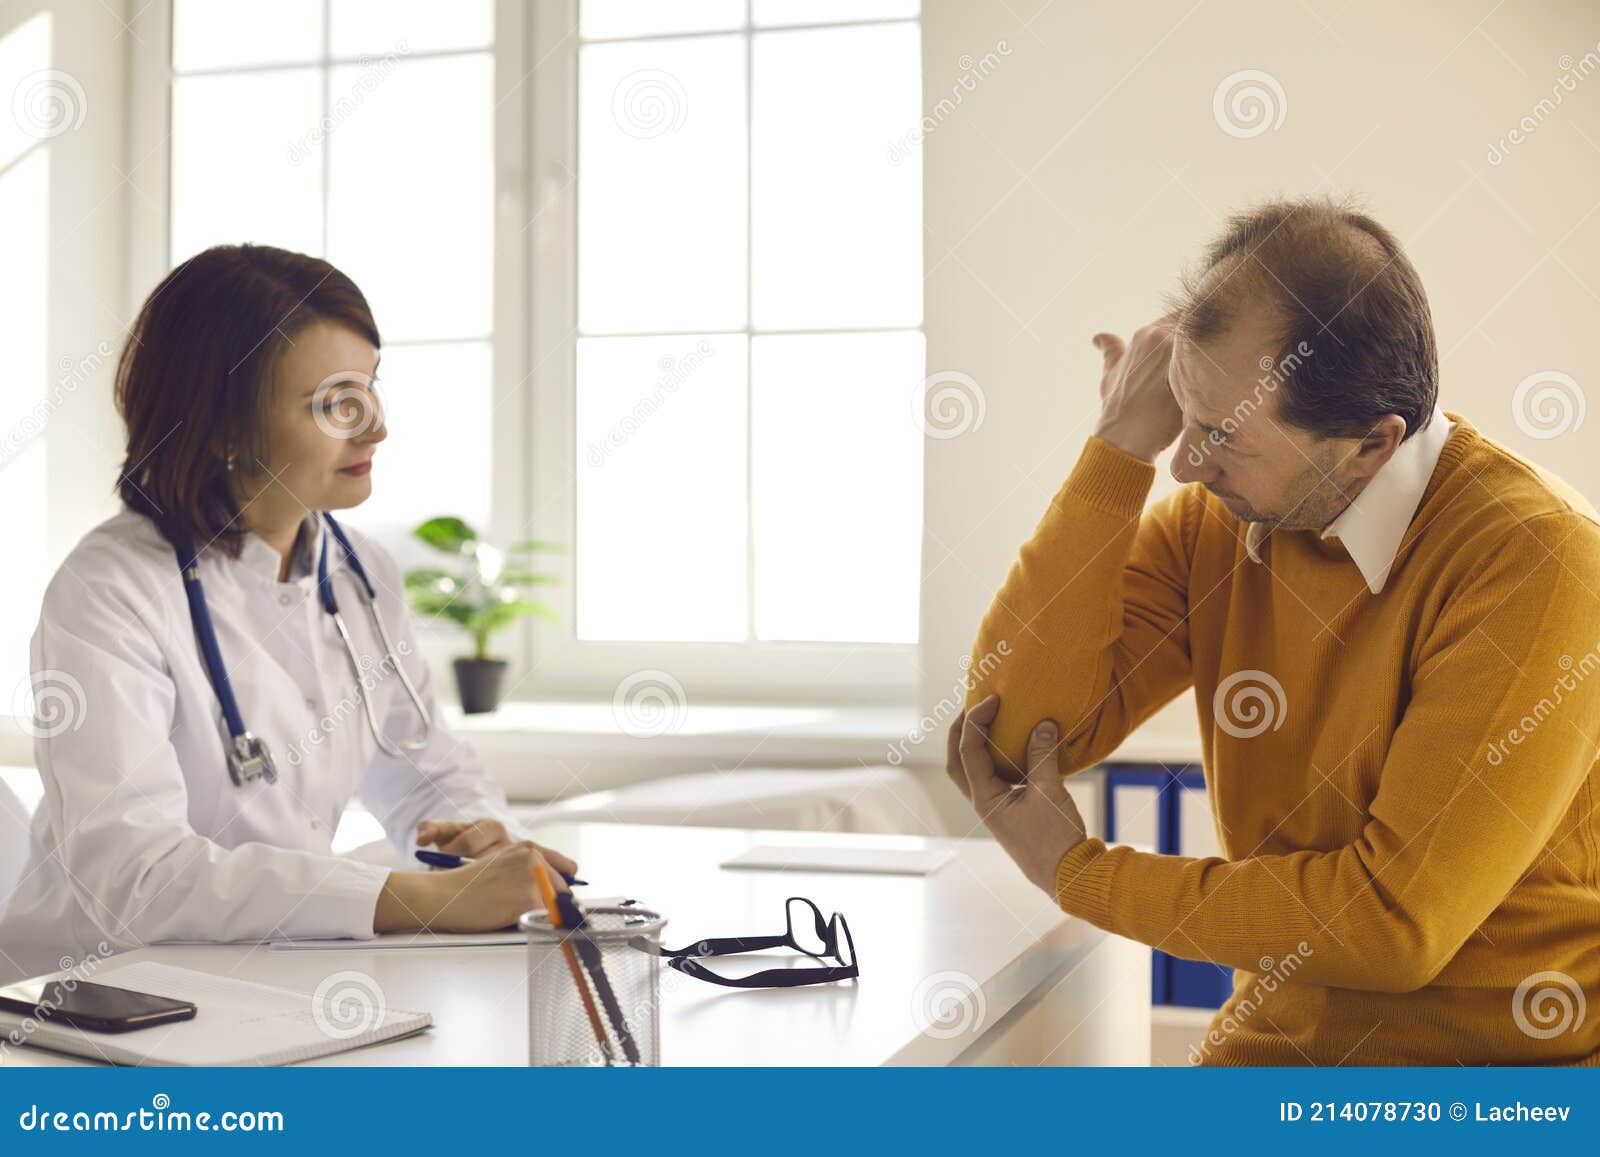 senior patient visiting clinic and telling general practitioner about his elbow pain